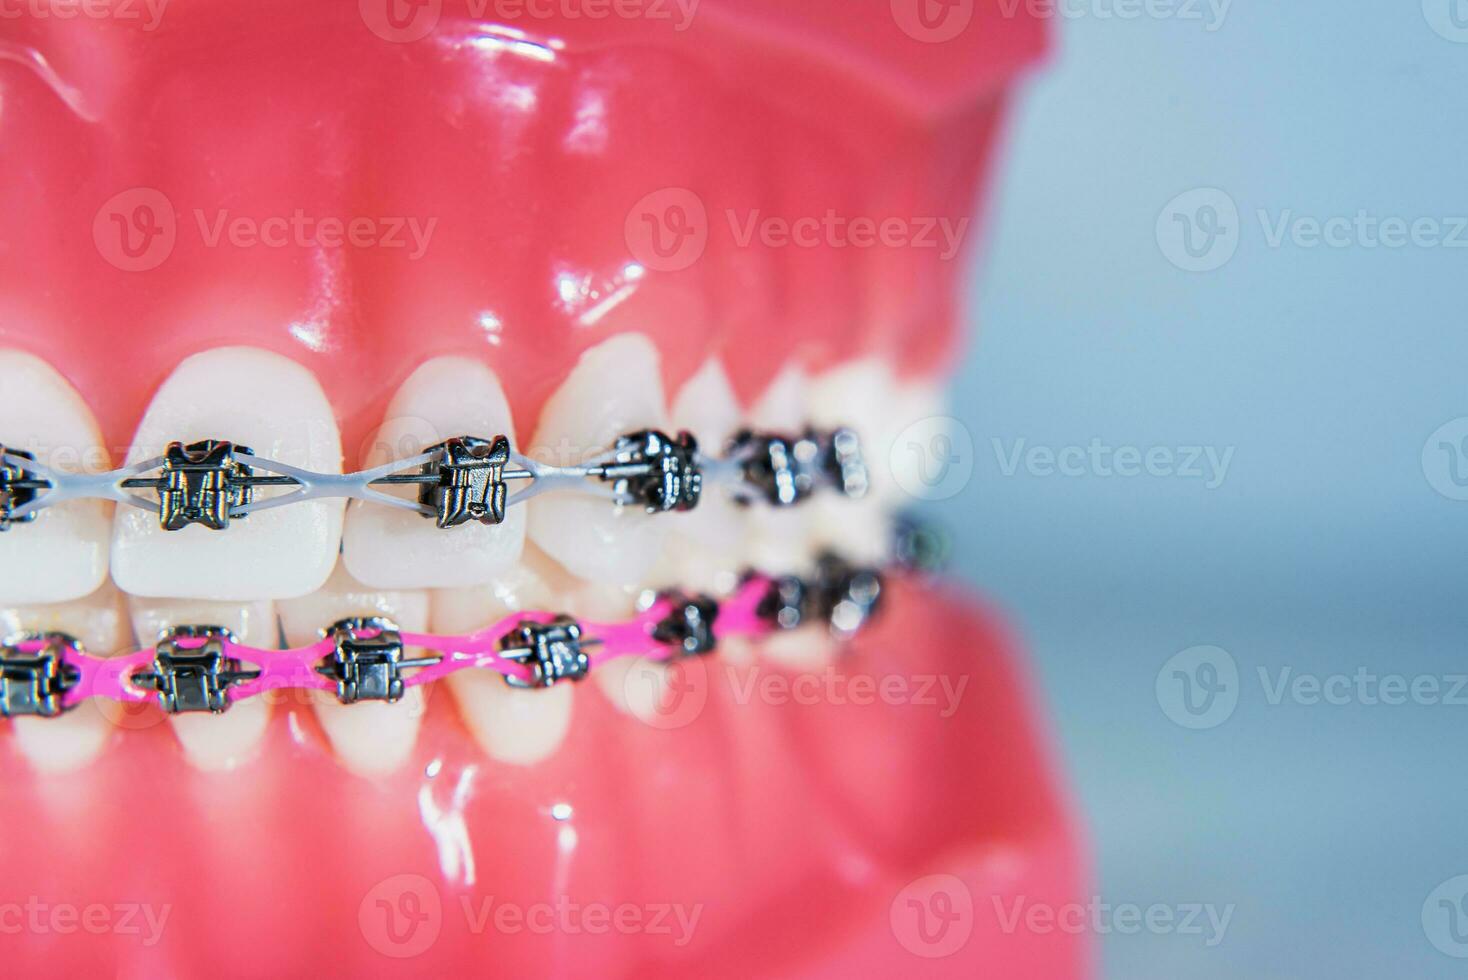 The braces are placed on the teeth in the artificial jaw. Macro photography photo